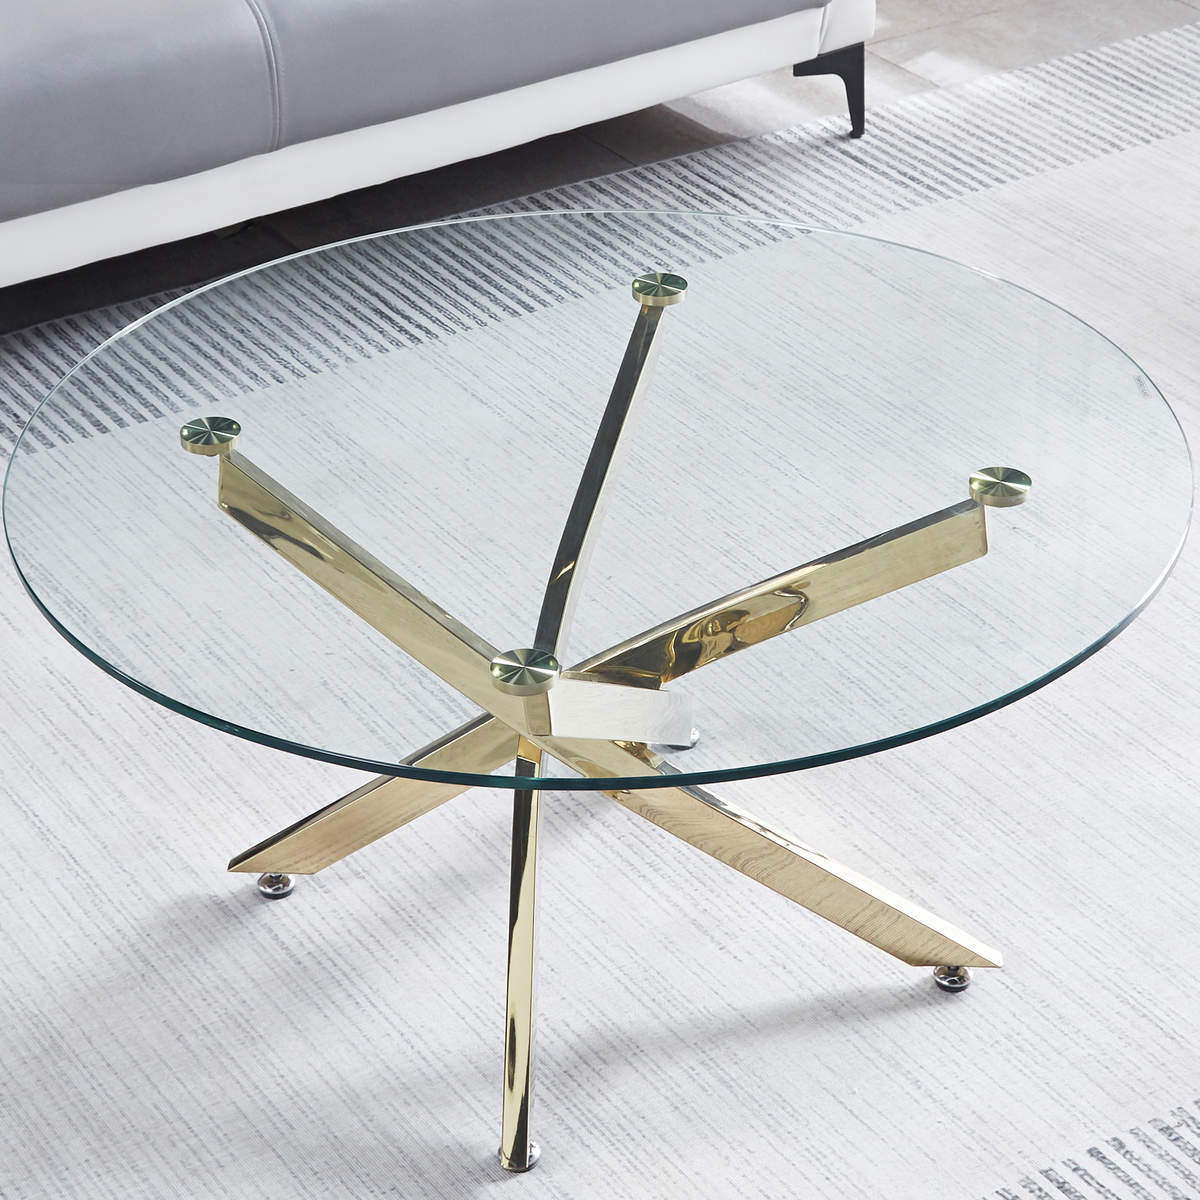 Modern Round Tempered Glass Coffee Table with Chrome Legs - Gold